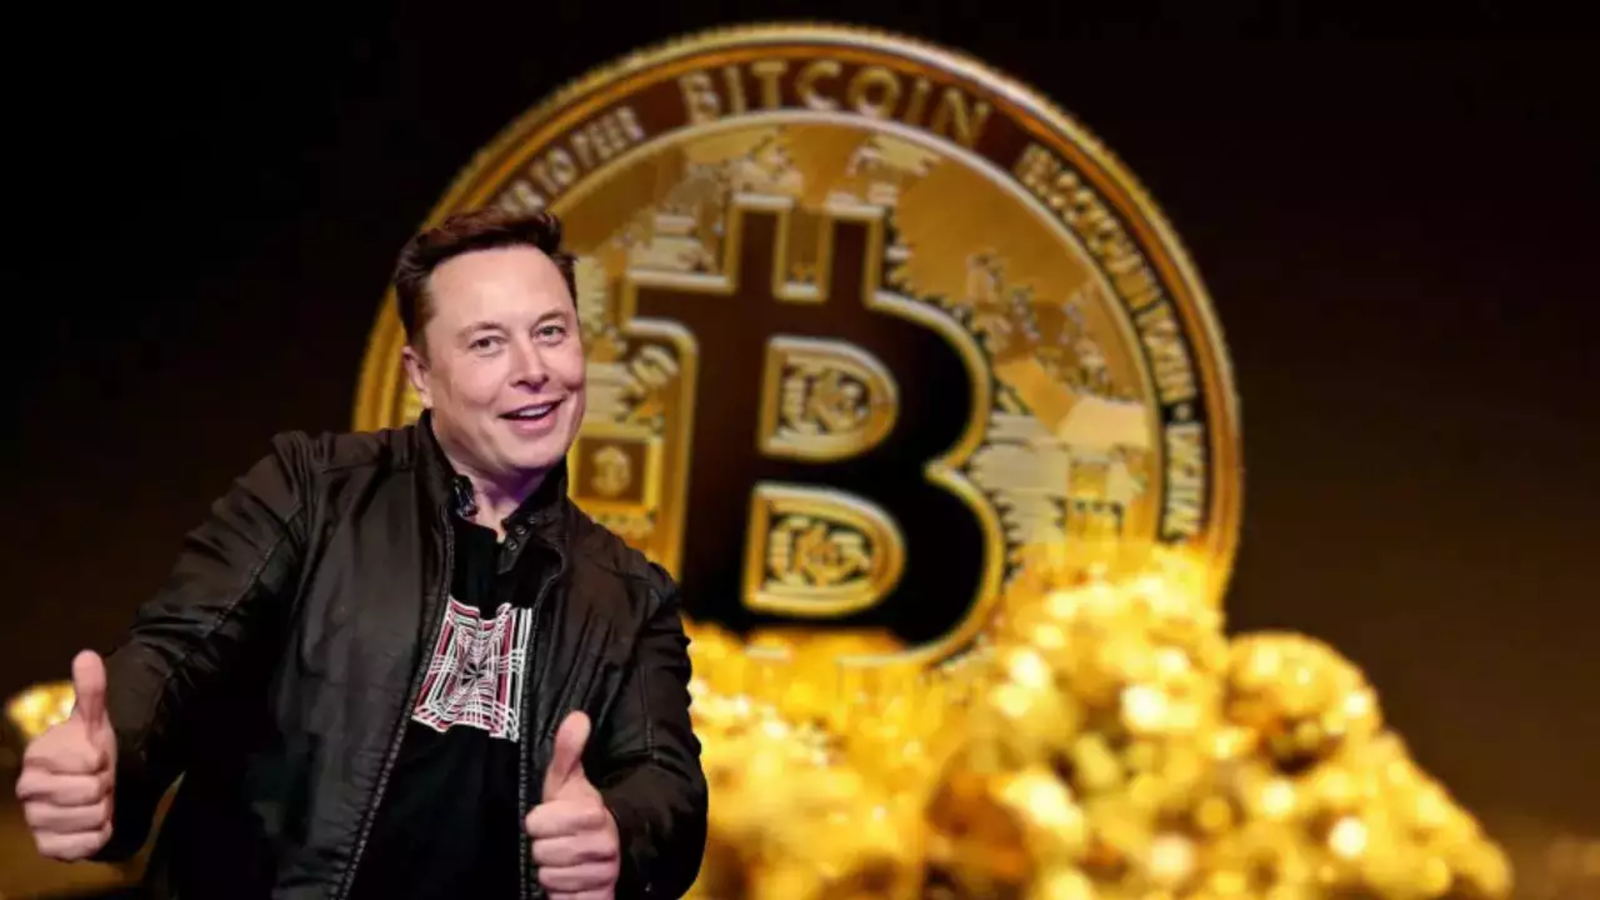 Elon Musk Deepfake used in YouTube cryptocurrency scam